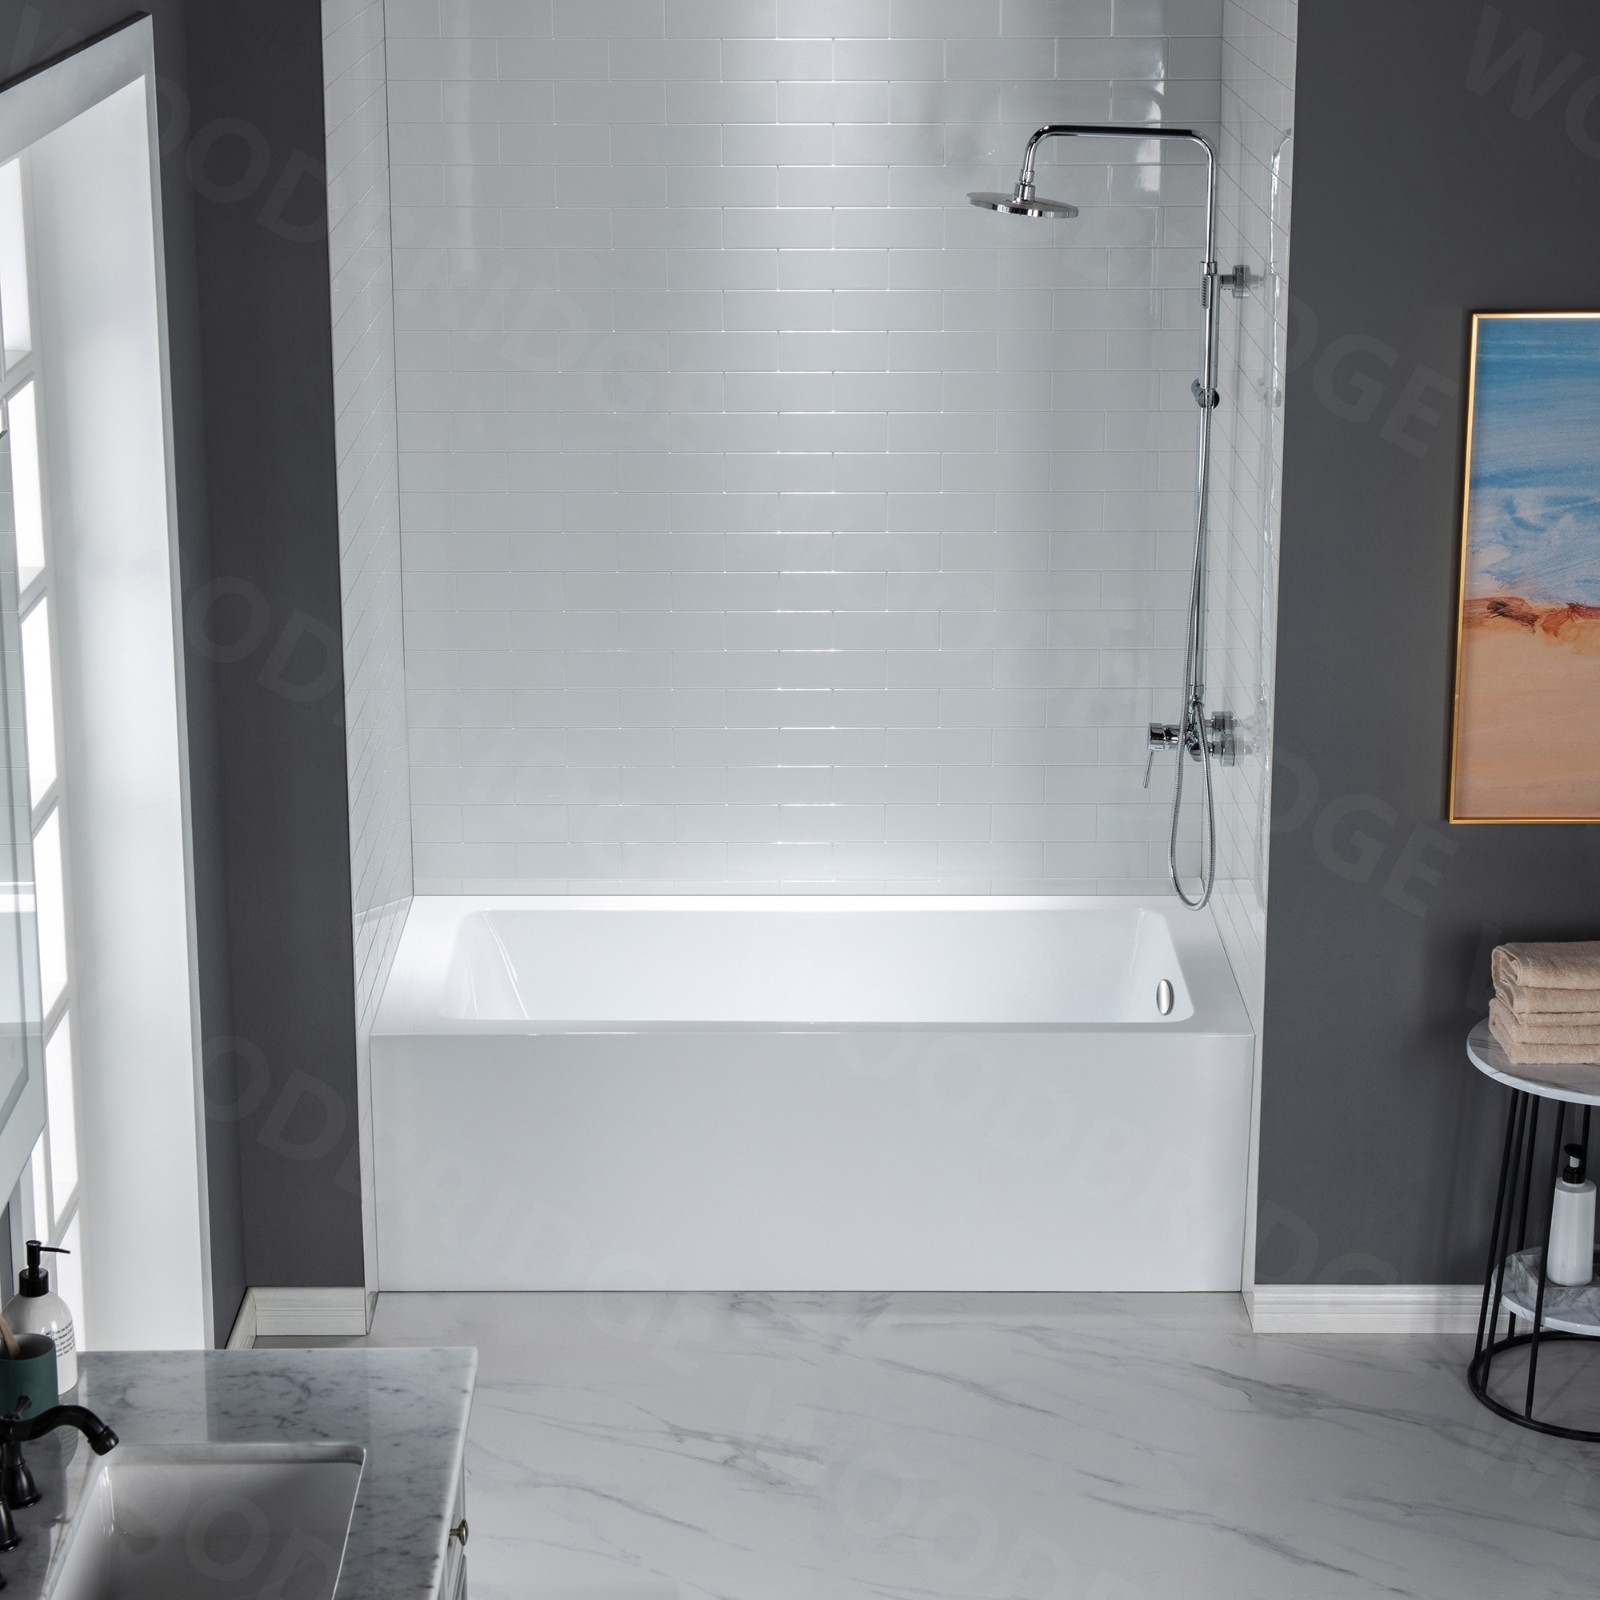  WOODBRIDGE 60-Inch Contemporary Alcove Acrylic Bathtub with Right Hand Drain and Overflow Holes, White_9578